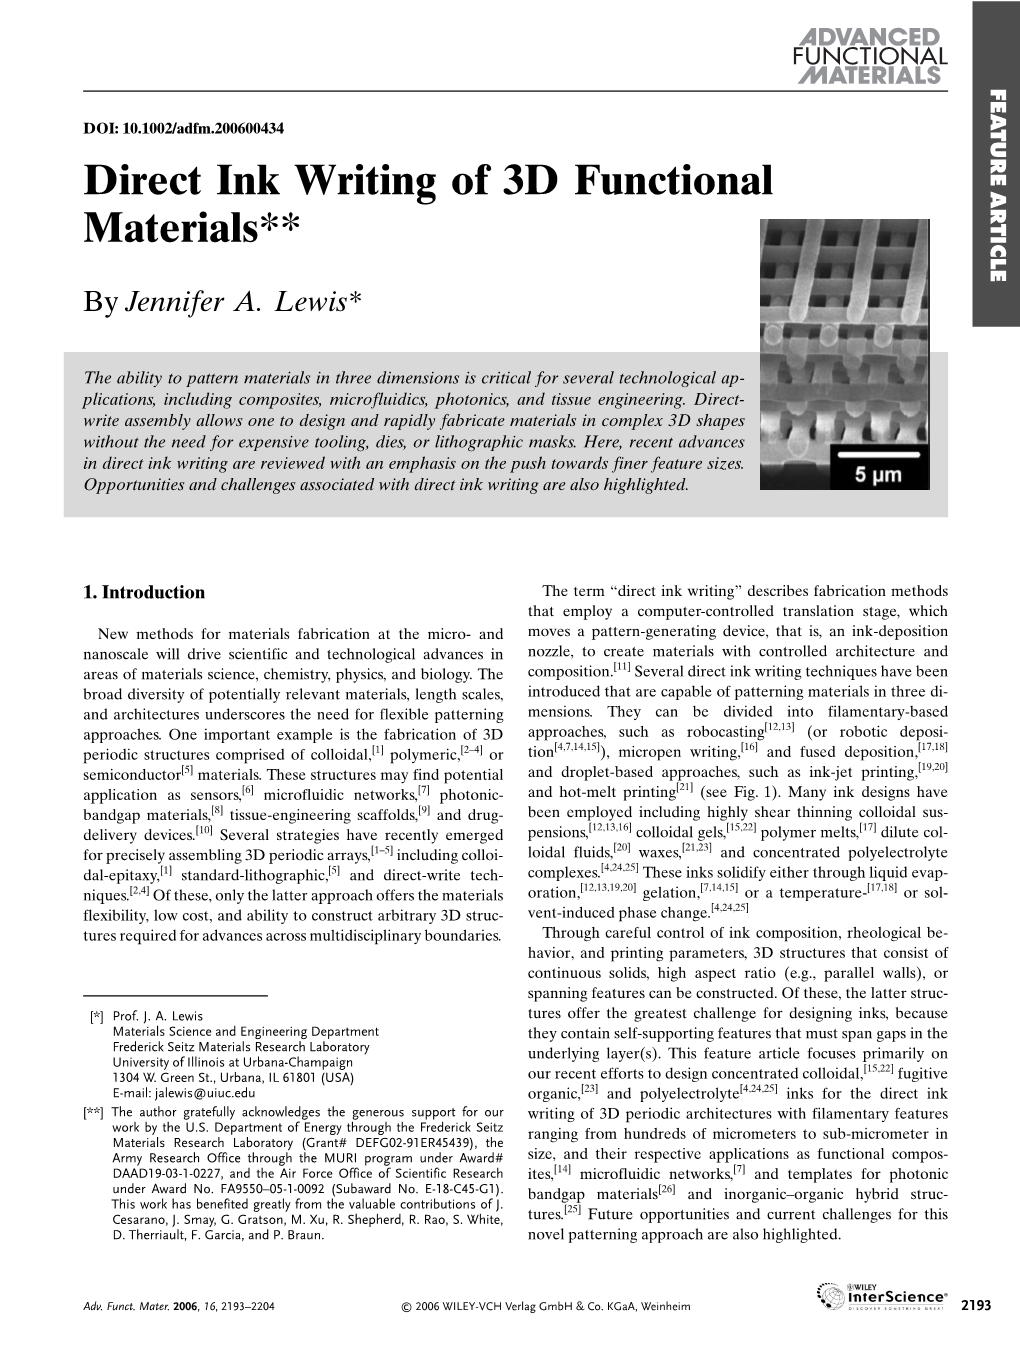 Direct Ink Writing of 3D Functional Materials